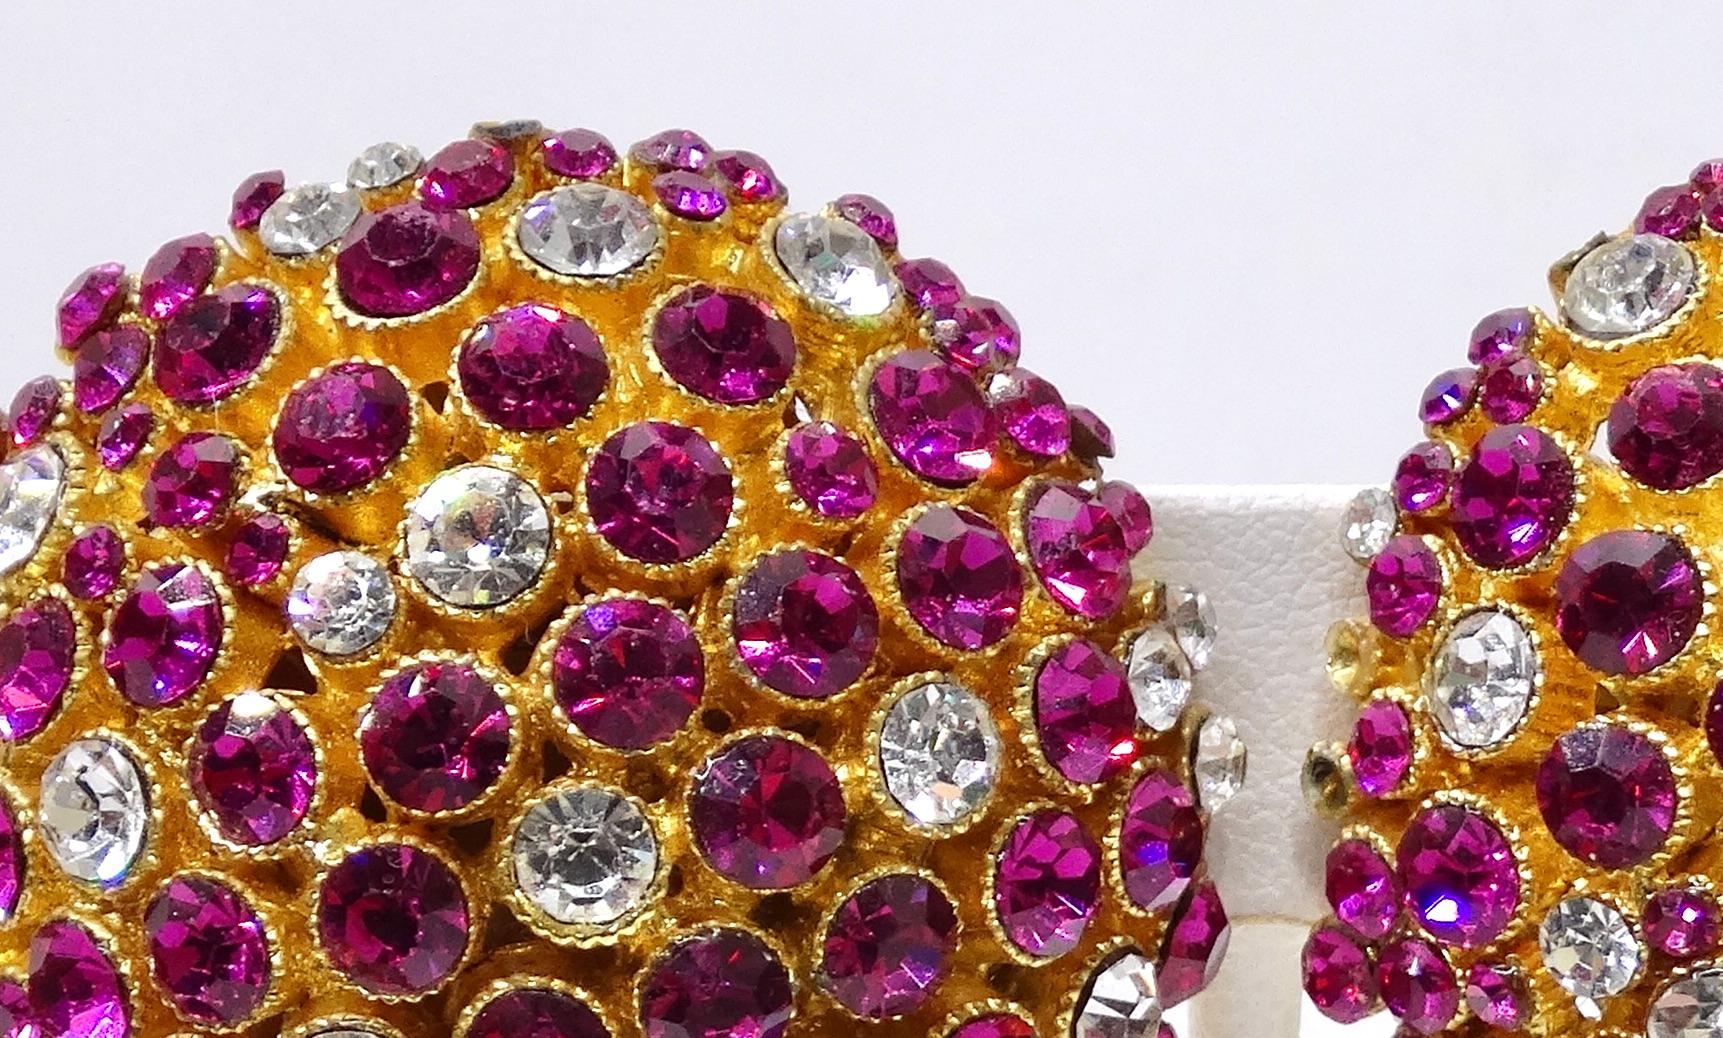 Here's your pop of magenta! No one will be able to resist complimenting you on these intricate adornments! Spice up any outfit by adding these fully crystalized dome shaped earrings. These earrings are large and chunky in size, with a two length and